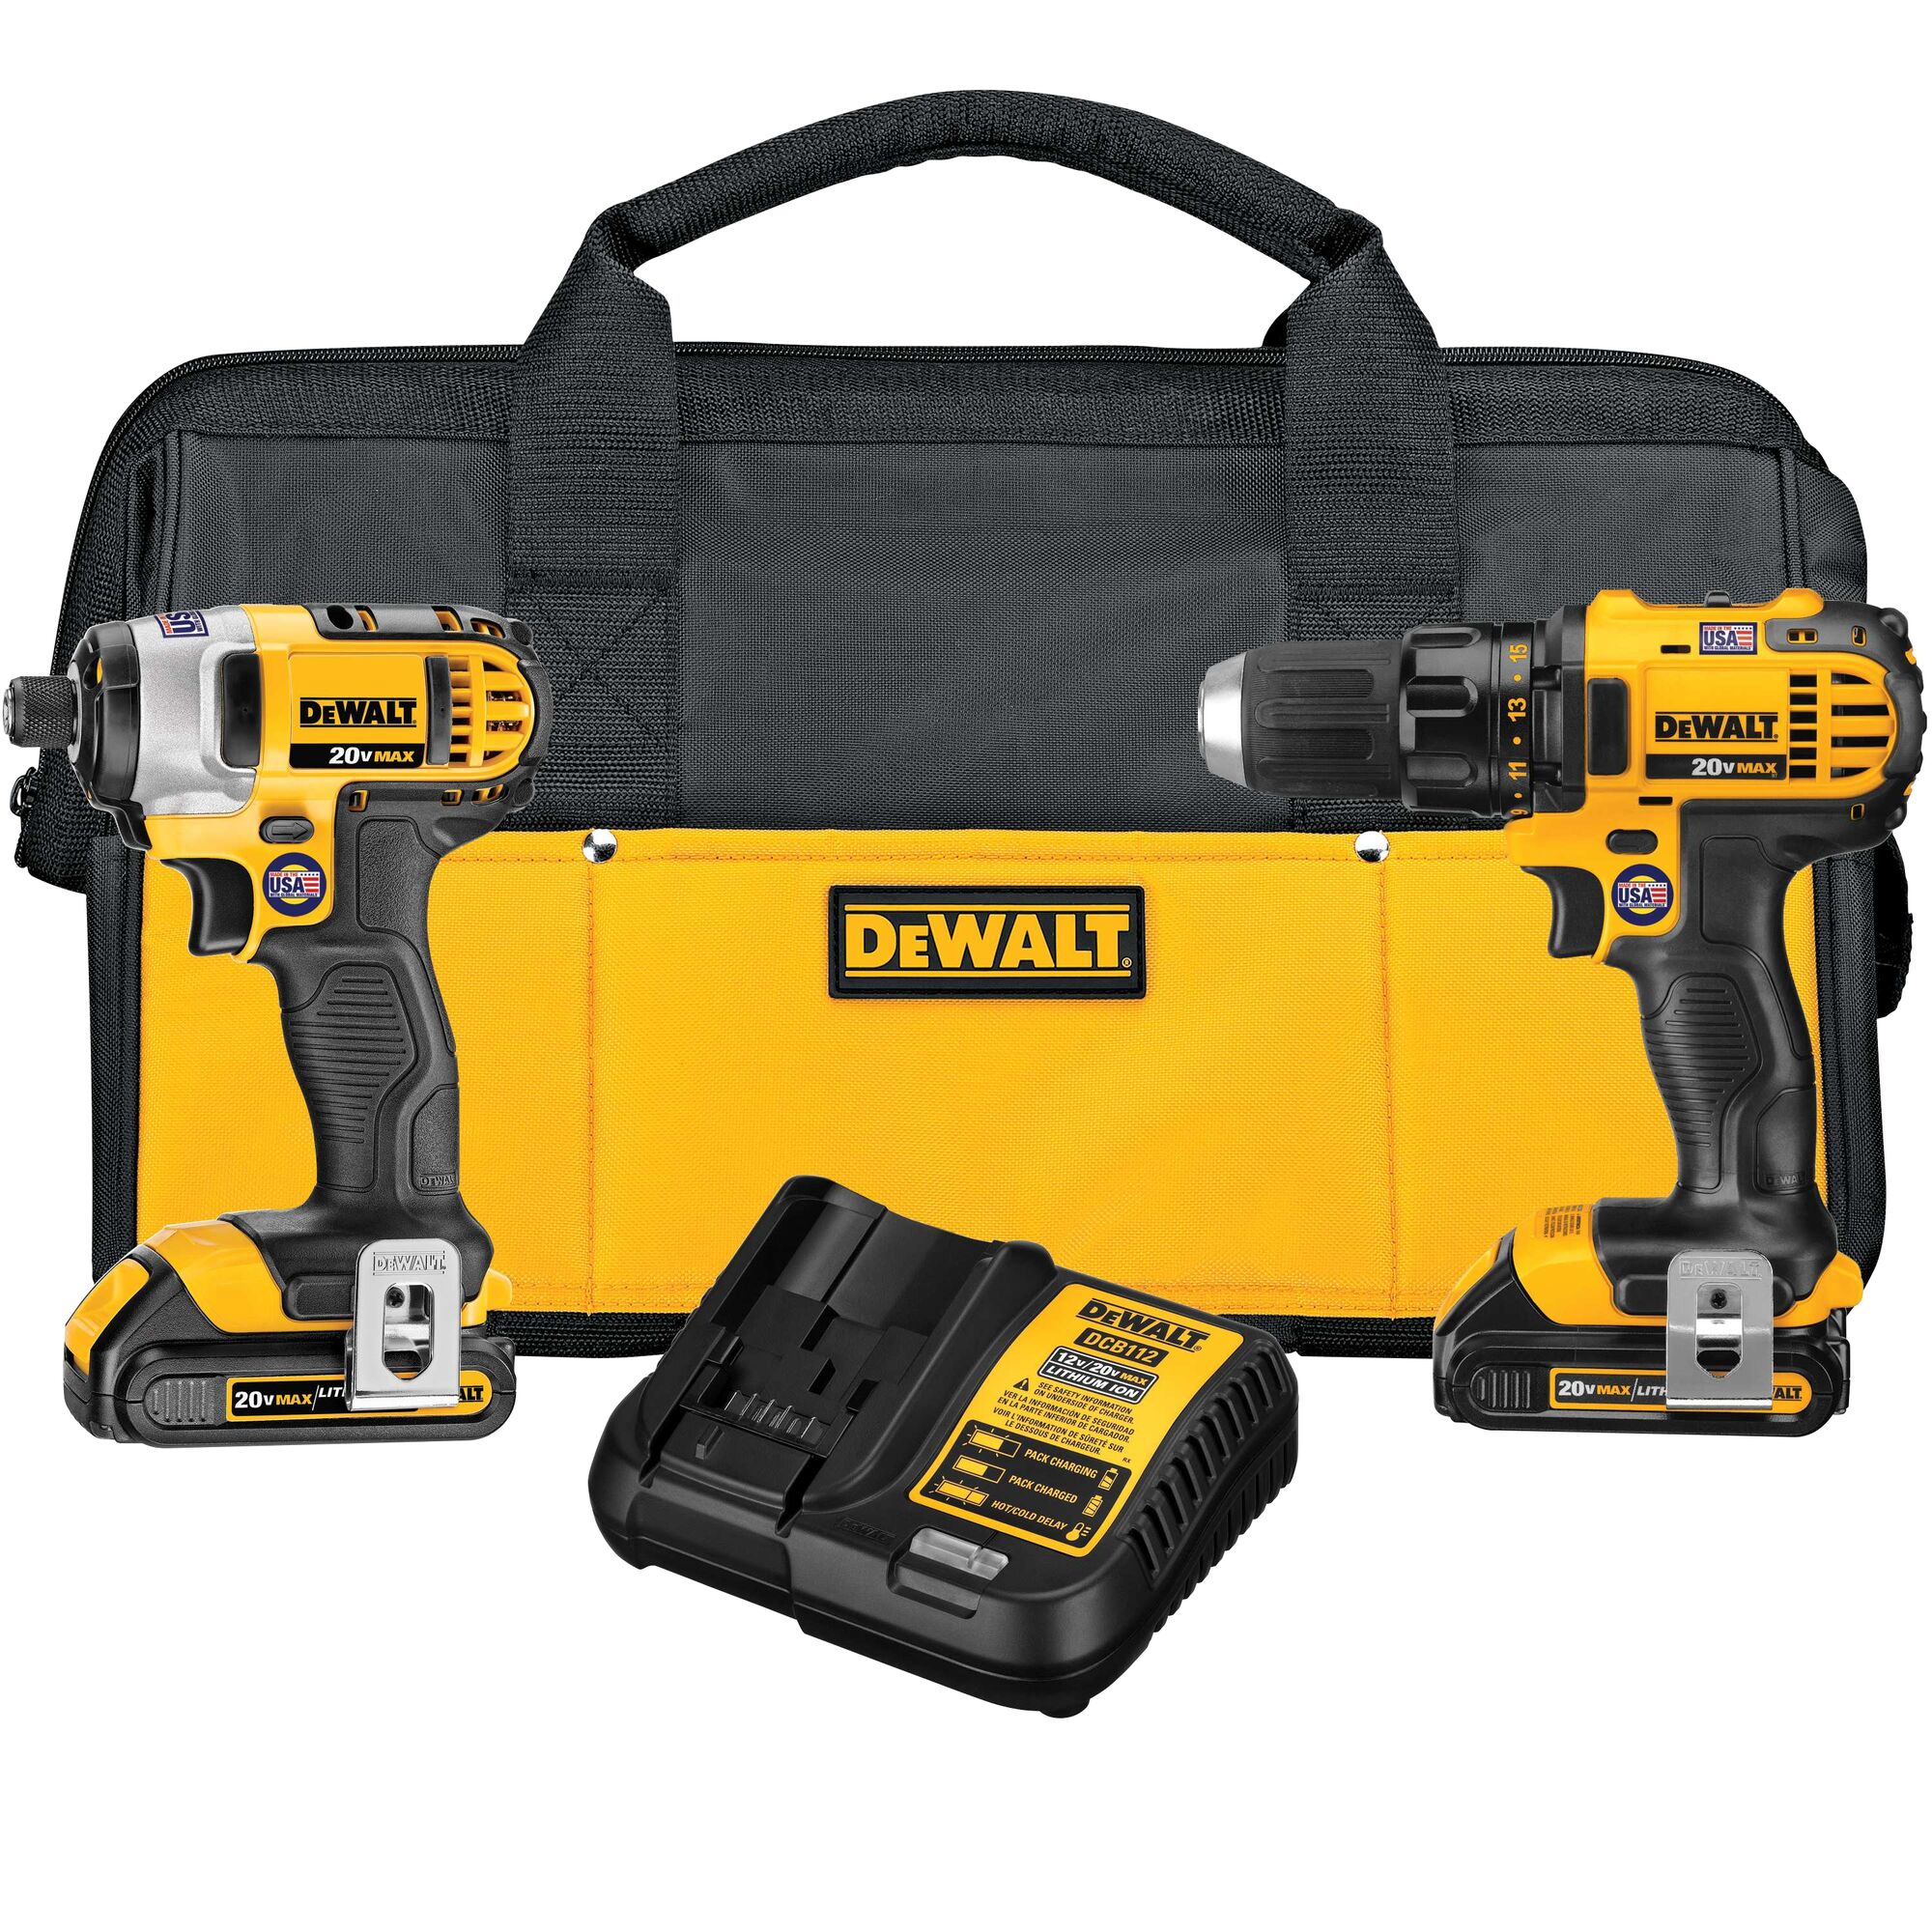 Dewalt DCK280C2 20V MAX Lithium Ion Compact and Impact Drill Driver Combo Kit 